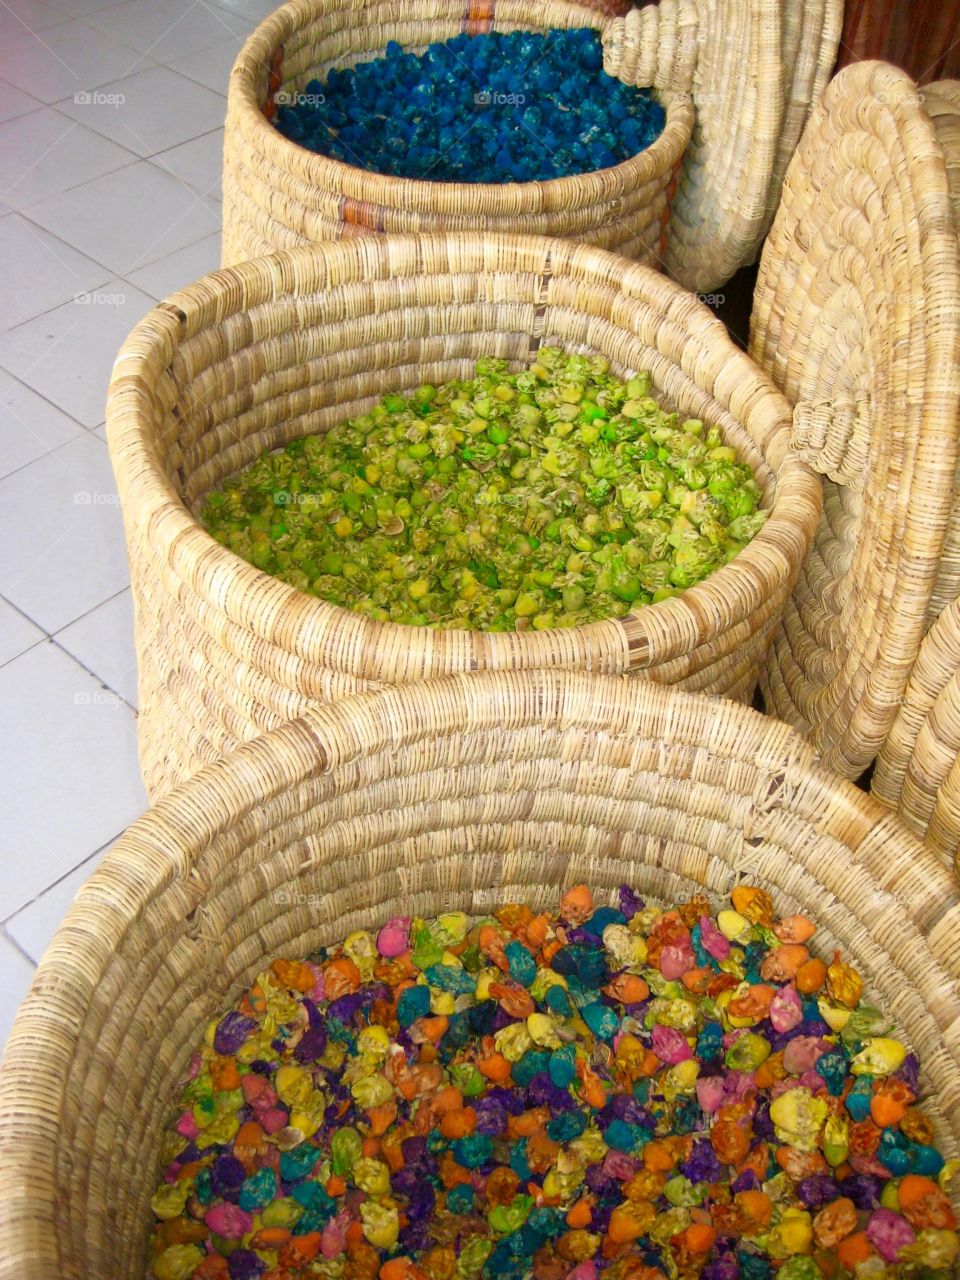 This is the flowers they use to make dyes and paints 